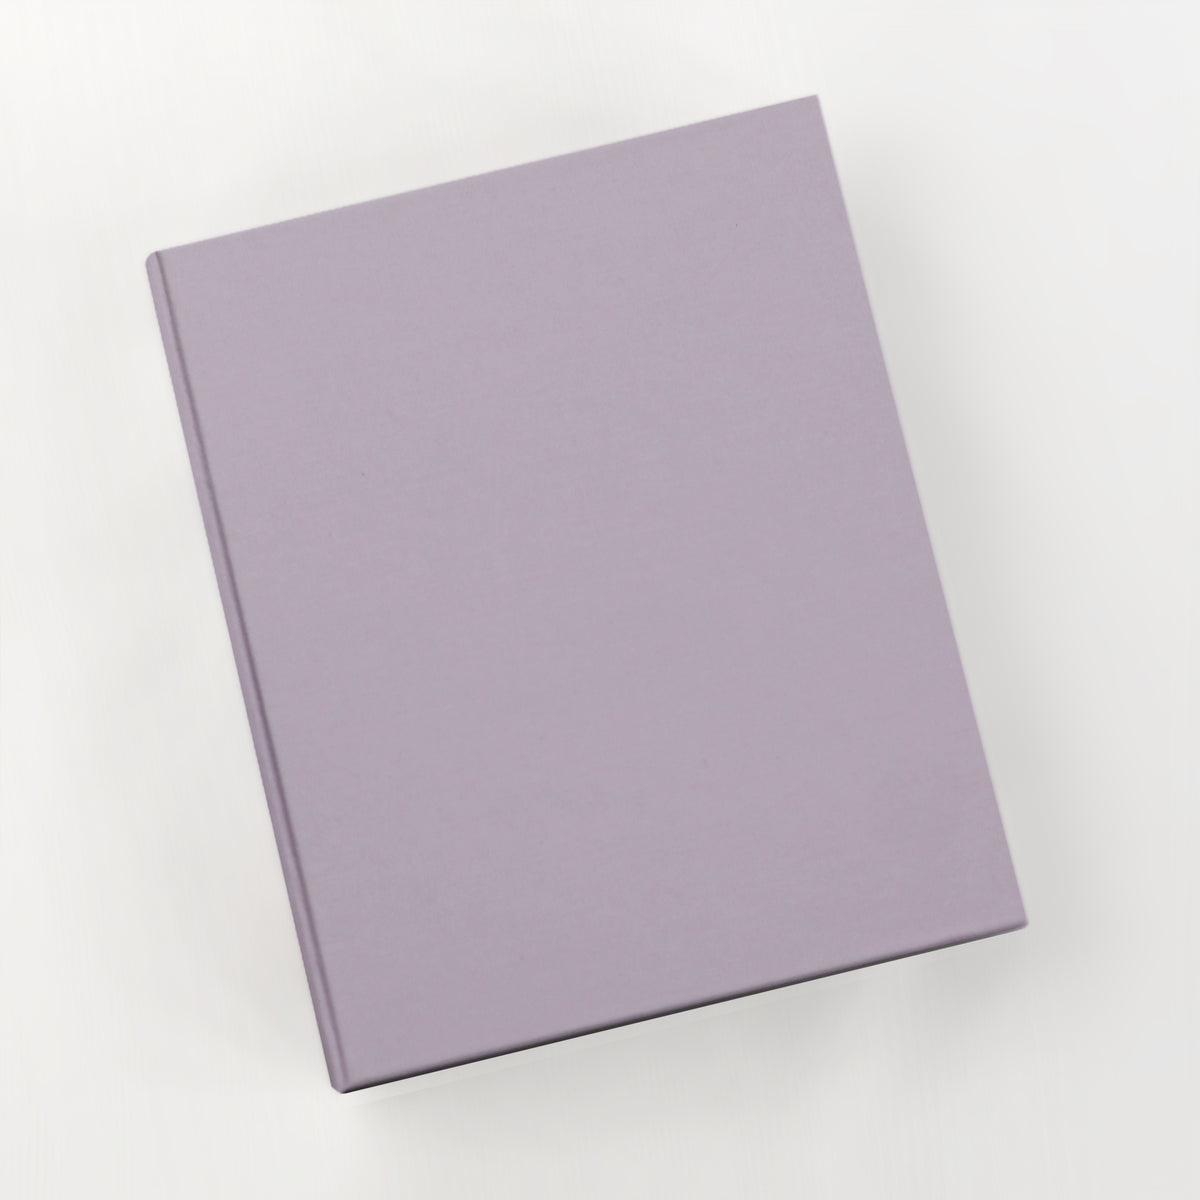 Large 8x10 Blank Page Journal | Cover: Lavender Cotton | Available Personalized